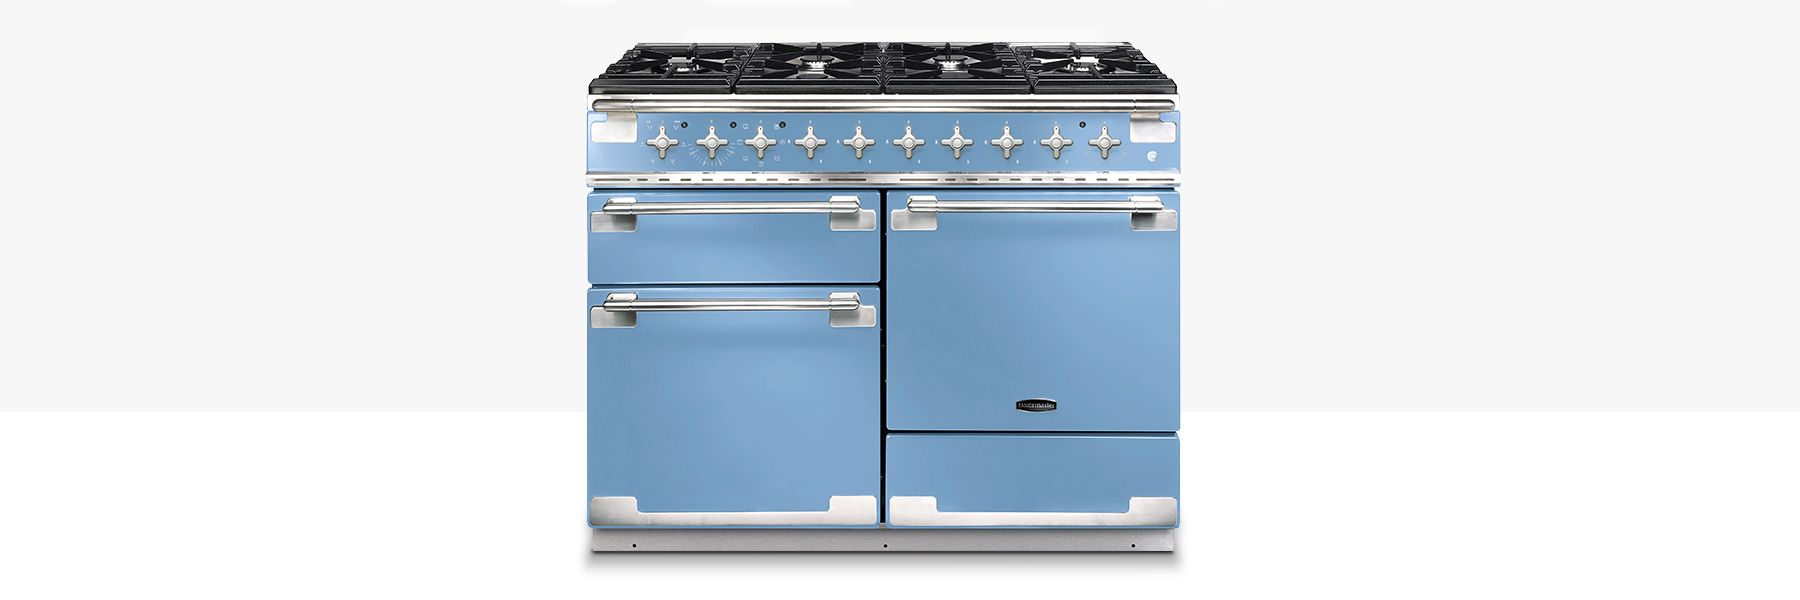 A range cooker example